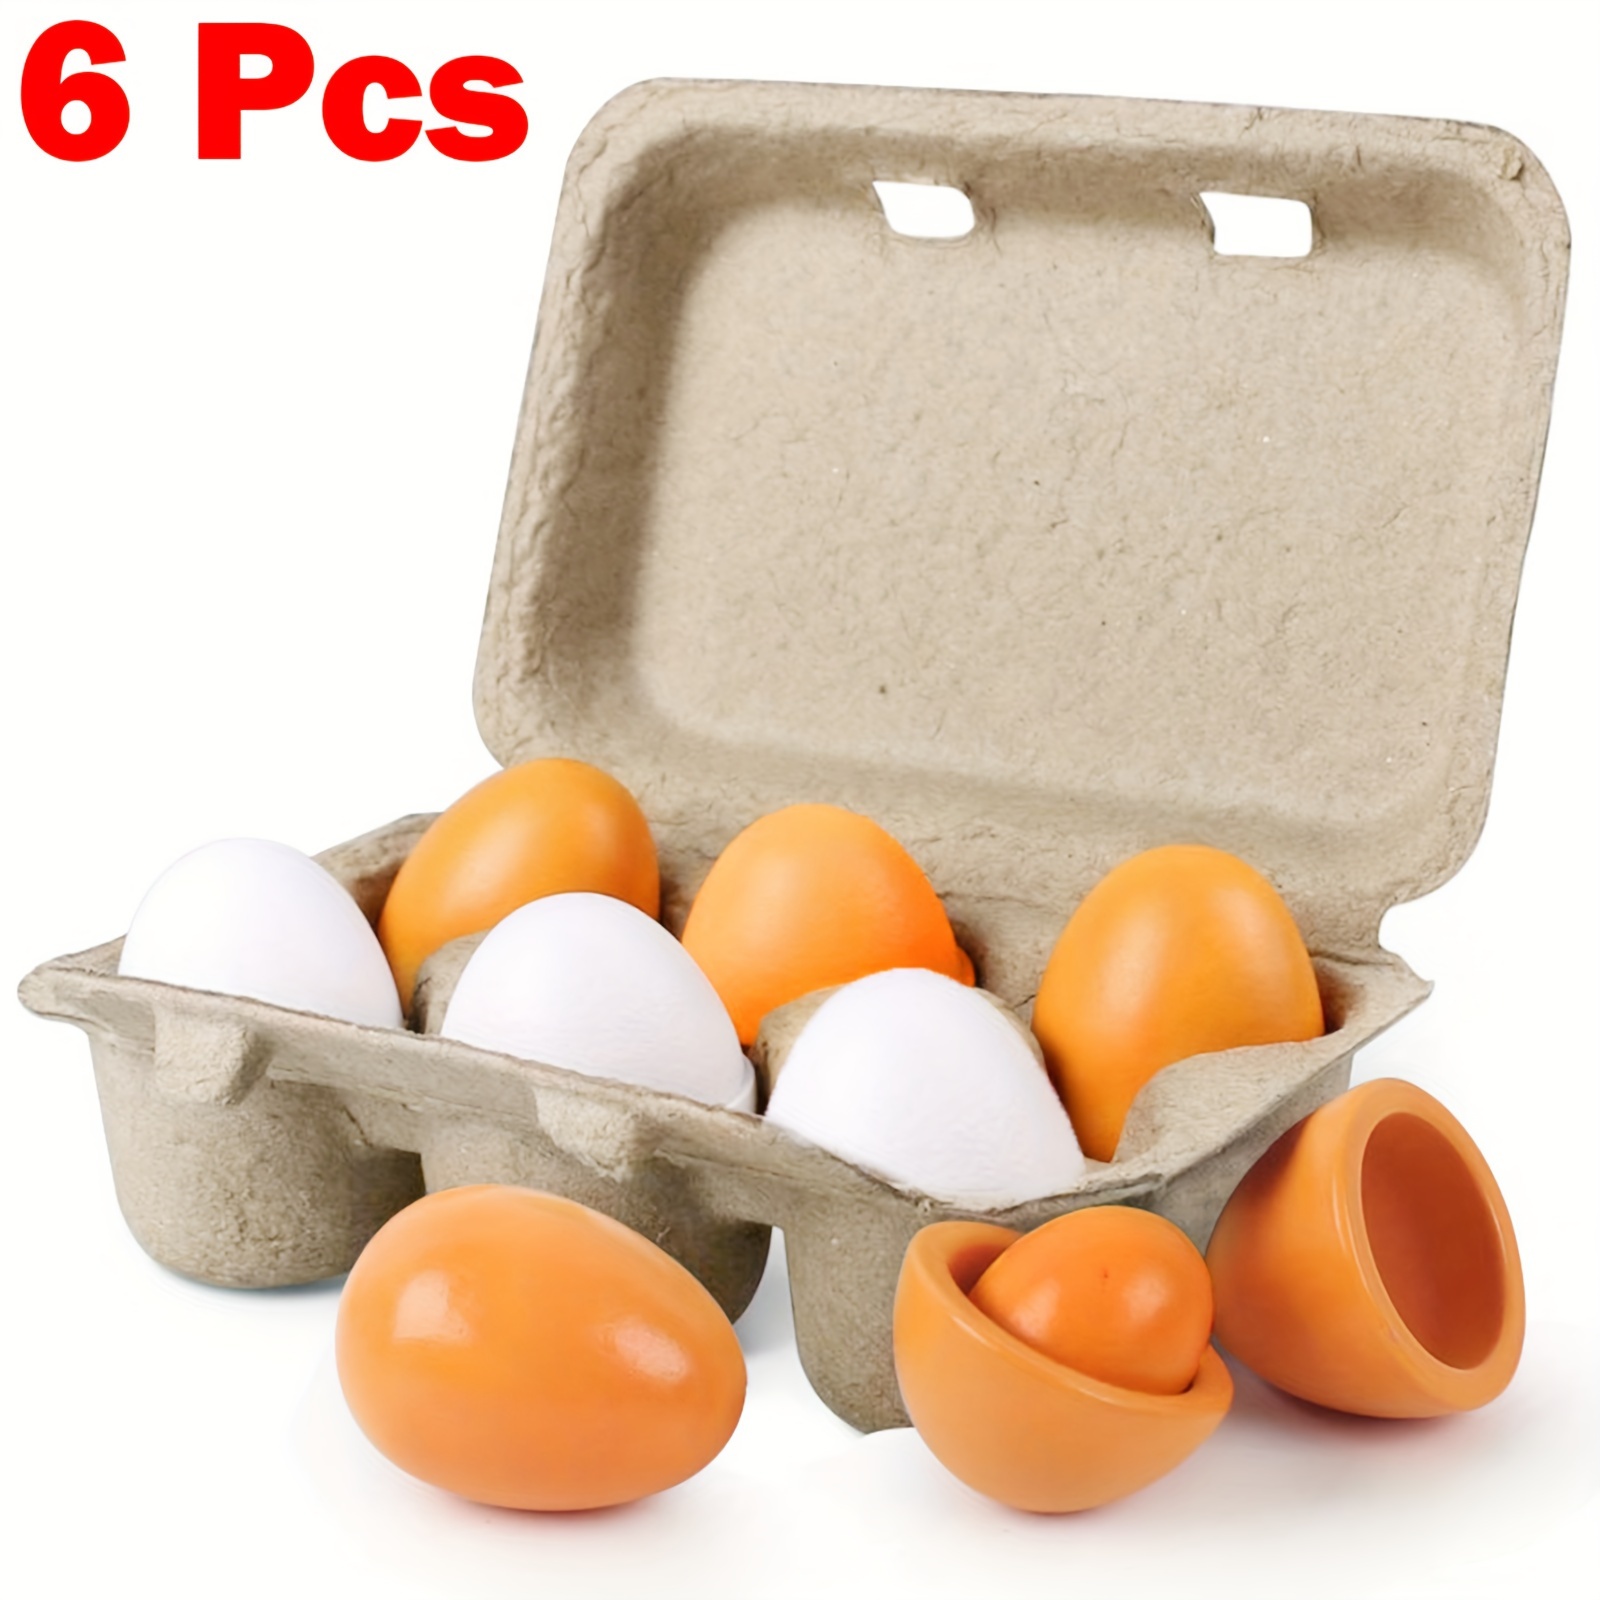 

6pcs Wooden Eggs, Easter Egg Toys Wooden Play Food Diy Egg Pretend Play Food Sets For Easter, Learning, Birthday Gifts (no Paints)